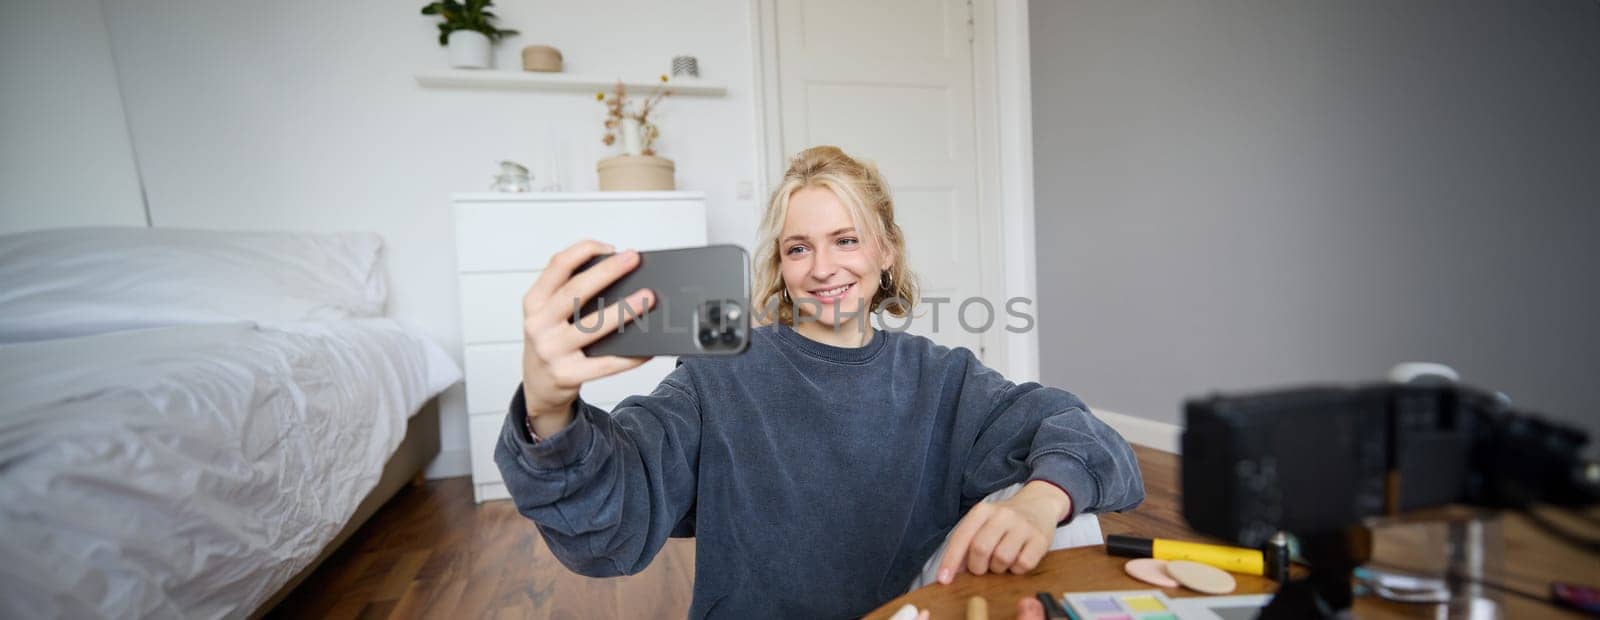 Portrait of young woman, girl beauty blogger, recording vlog in her bedroom, doing makeup tutorial for social media followers, taking selfies, live streaming on mobile phone app by Benzoix